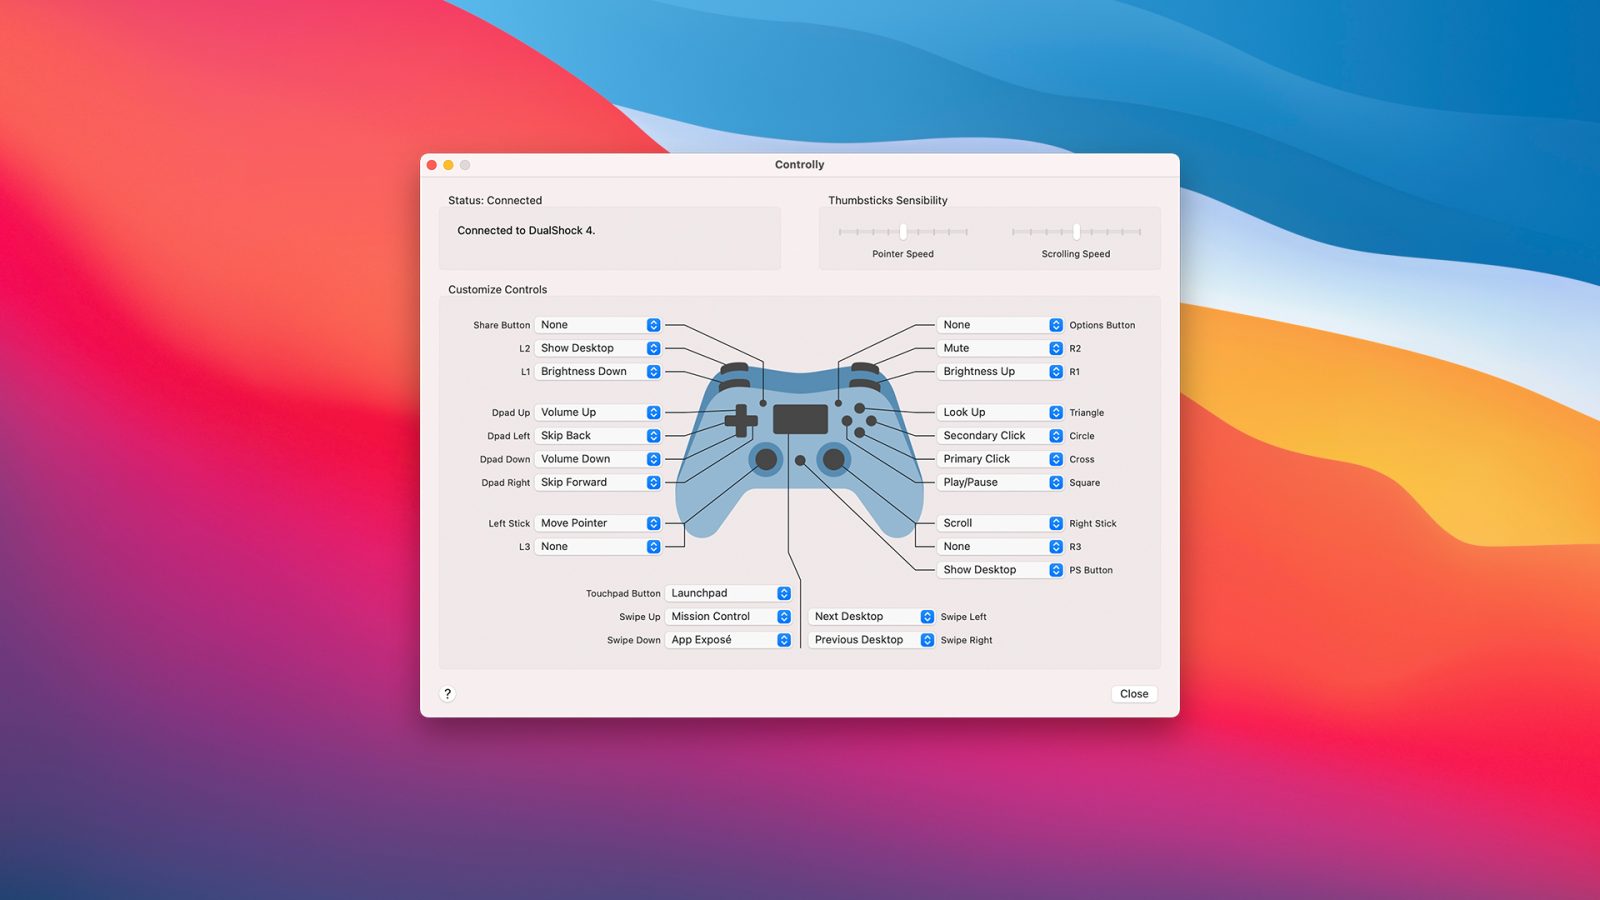 Gaming on a Mac? Here's how to connect a PS4 or Xbox One controller - CNET